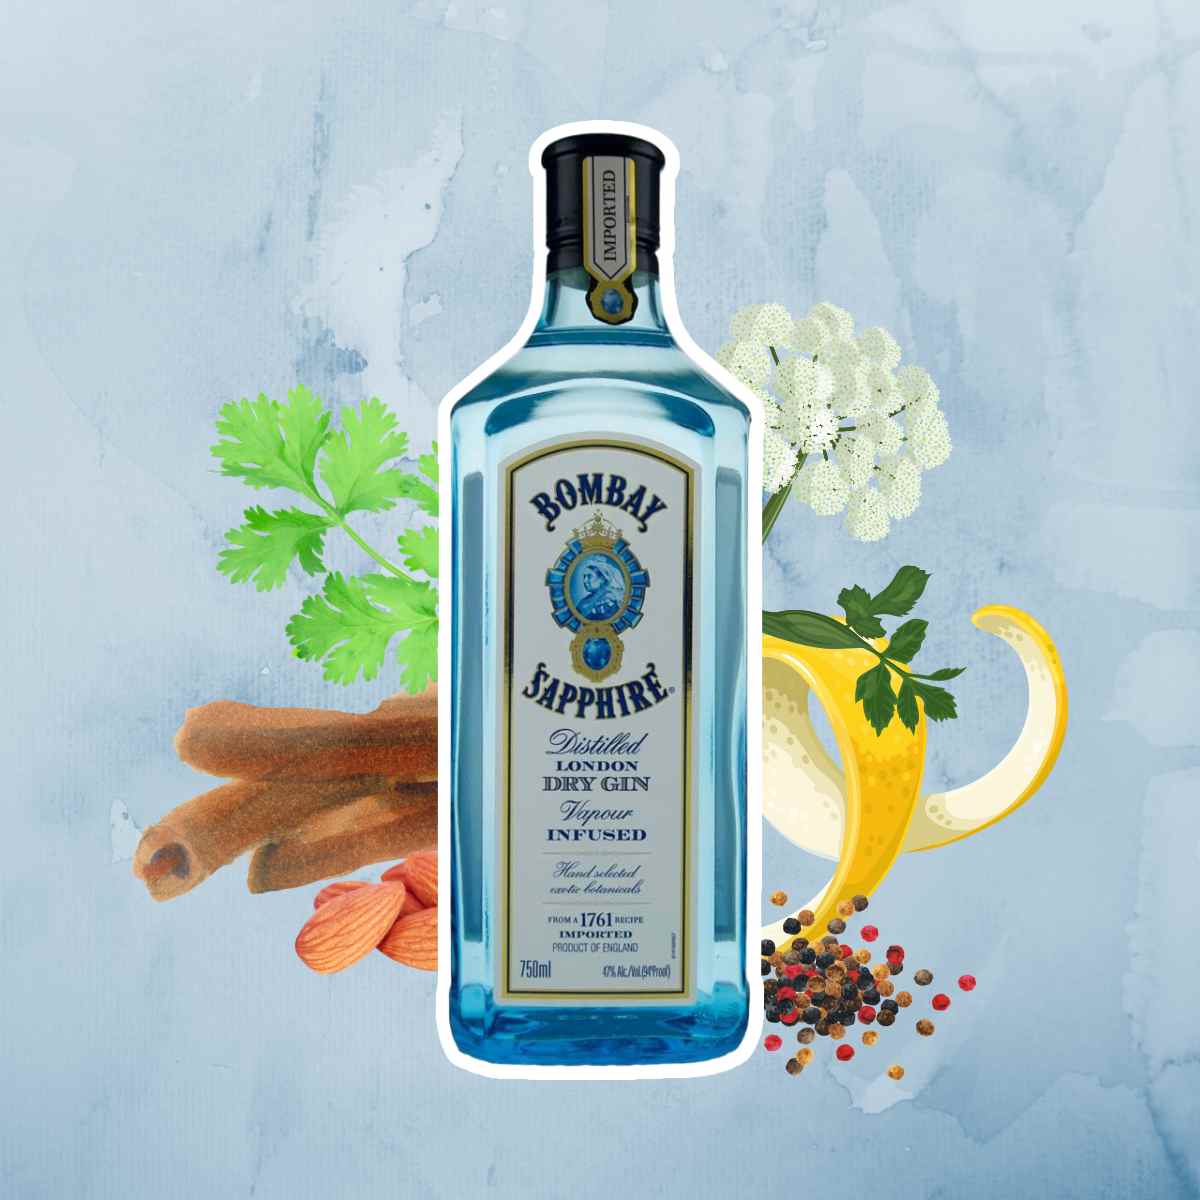 Bombay Sapphire Gin with botanicals